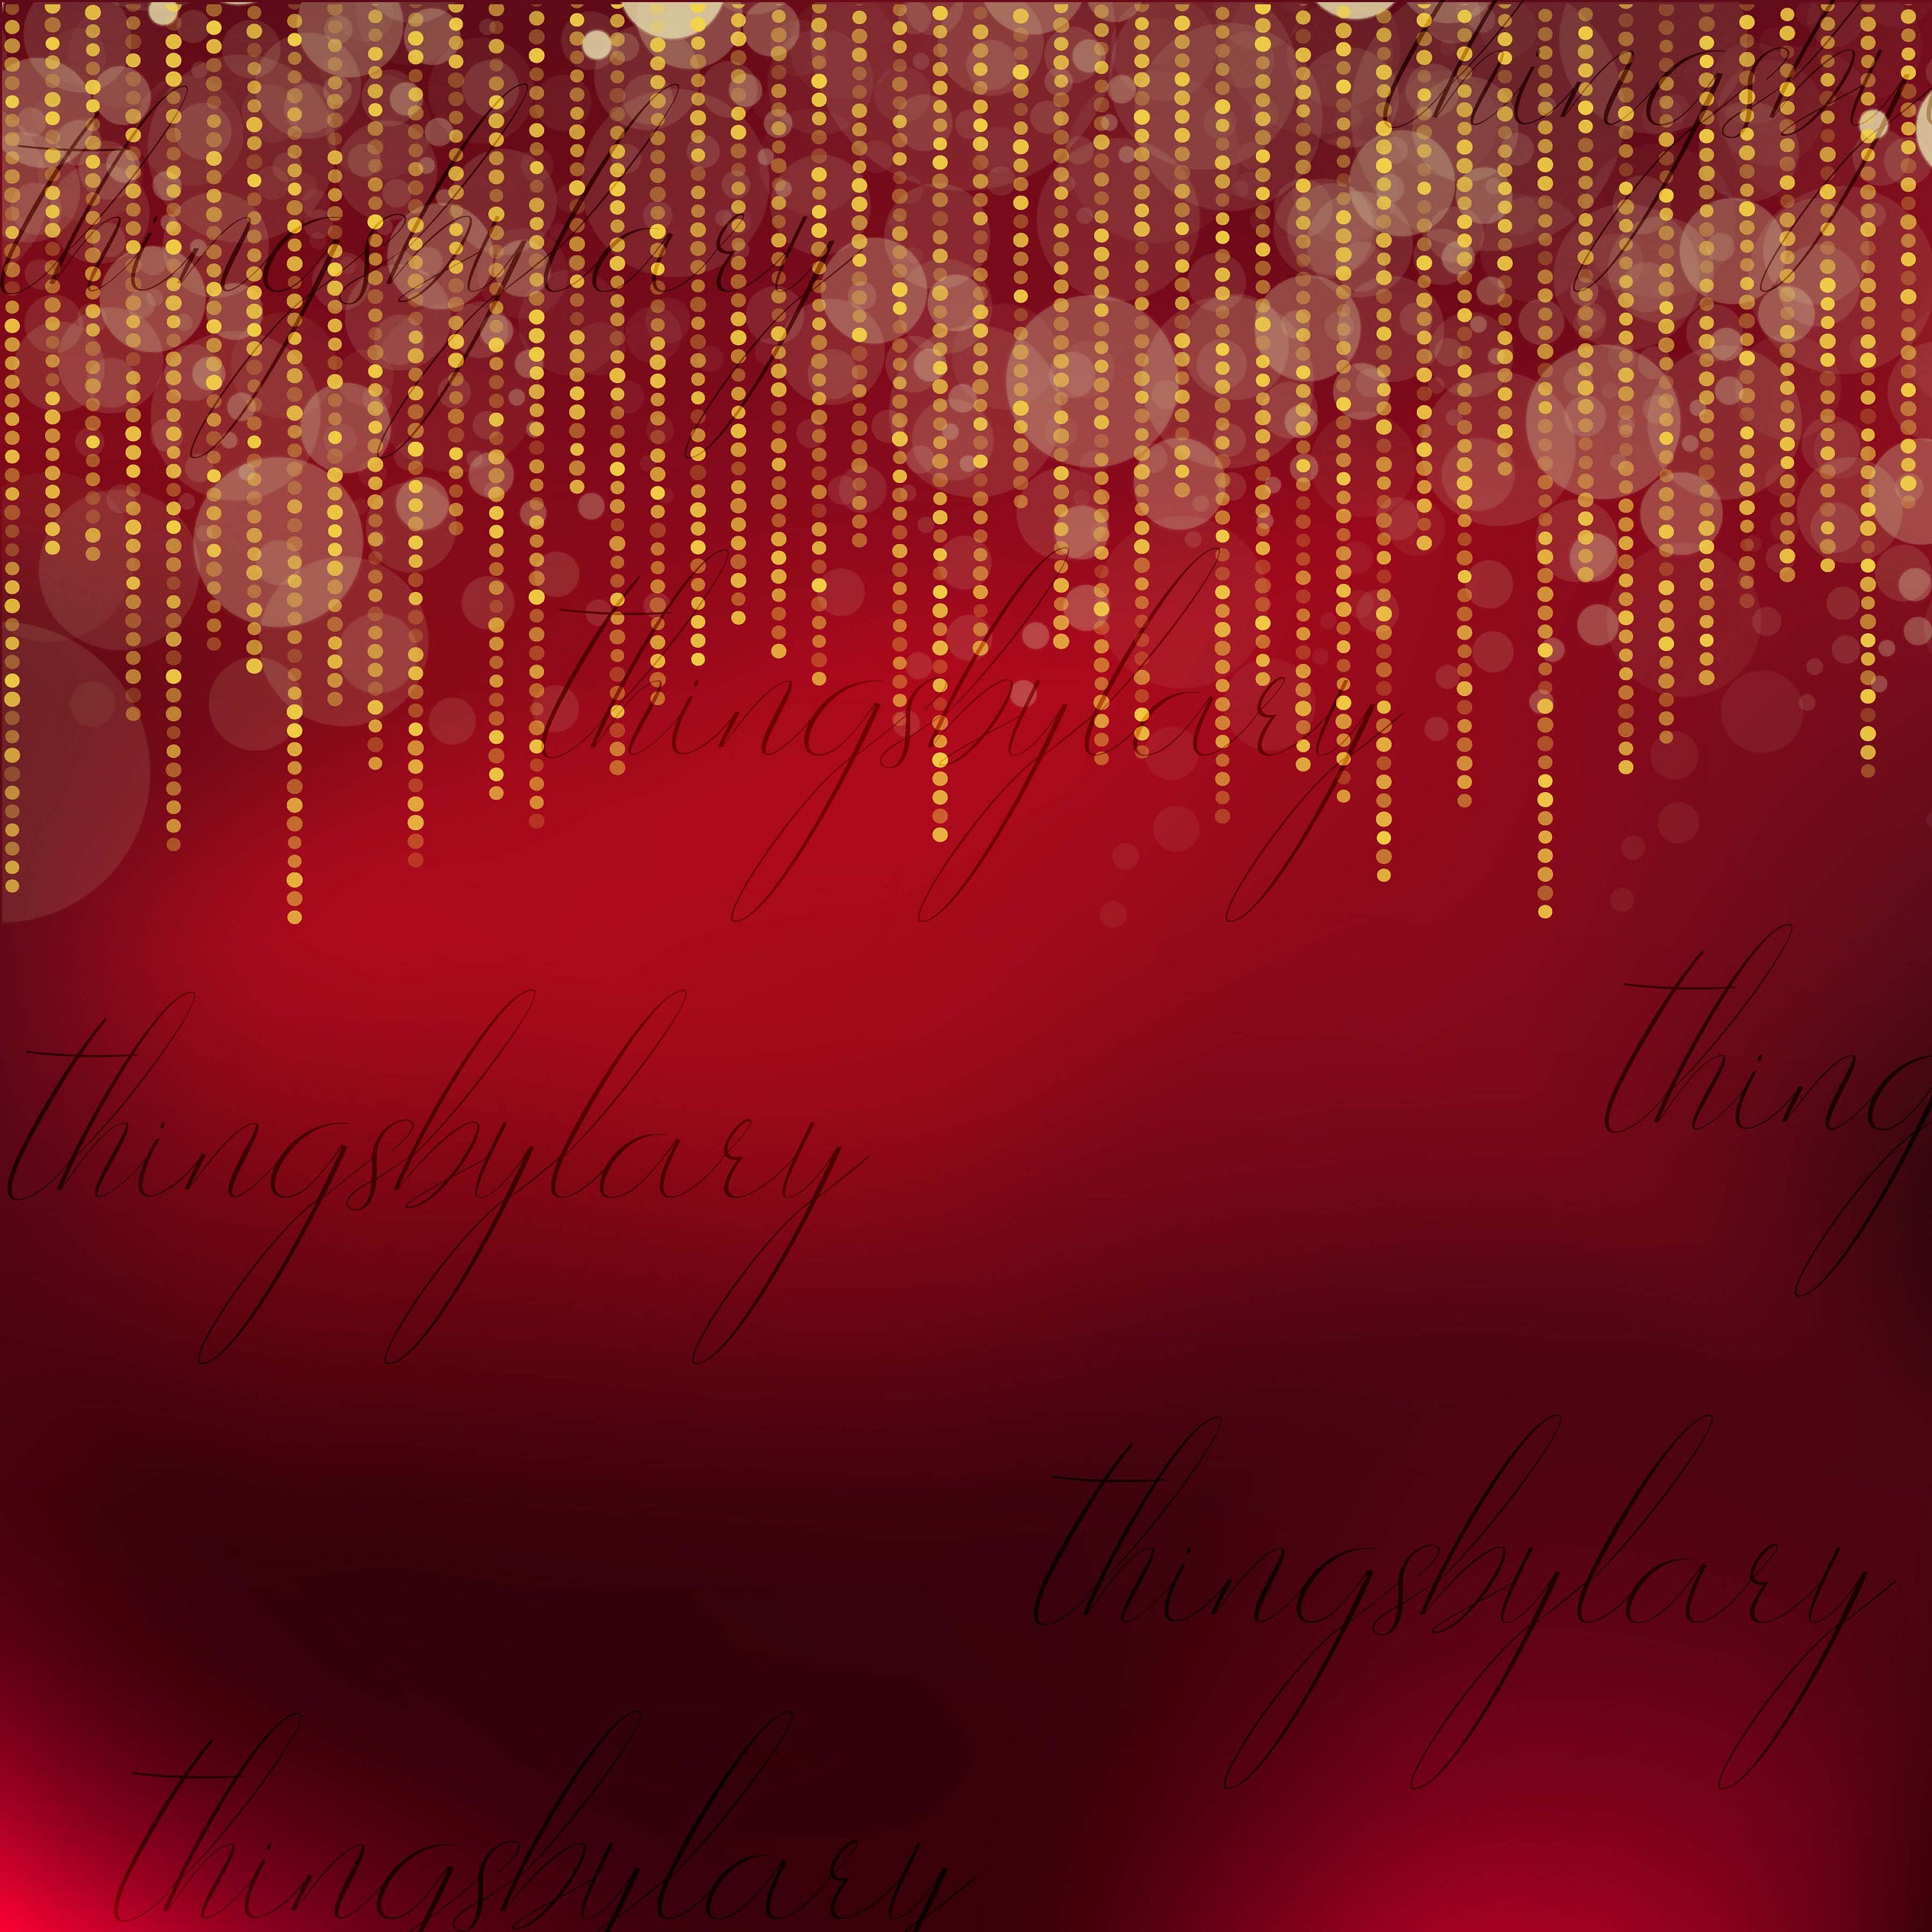 27 Bokeh Overlay Digital Images PNG Transparent 300 Dpi Instant Download Commercial Use Winter Overlay Christmas Holiday Heart Bokeh Curtain